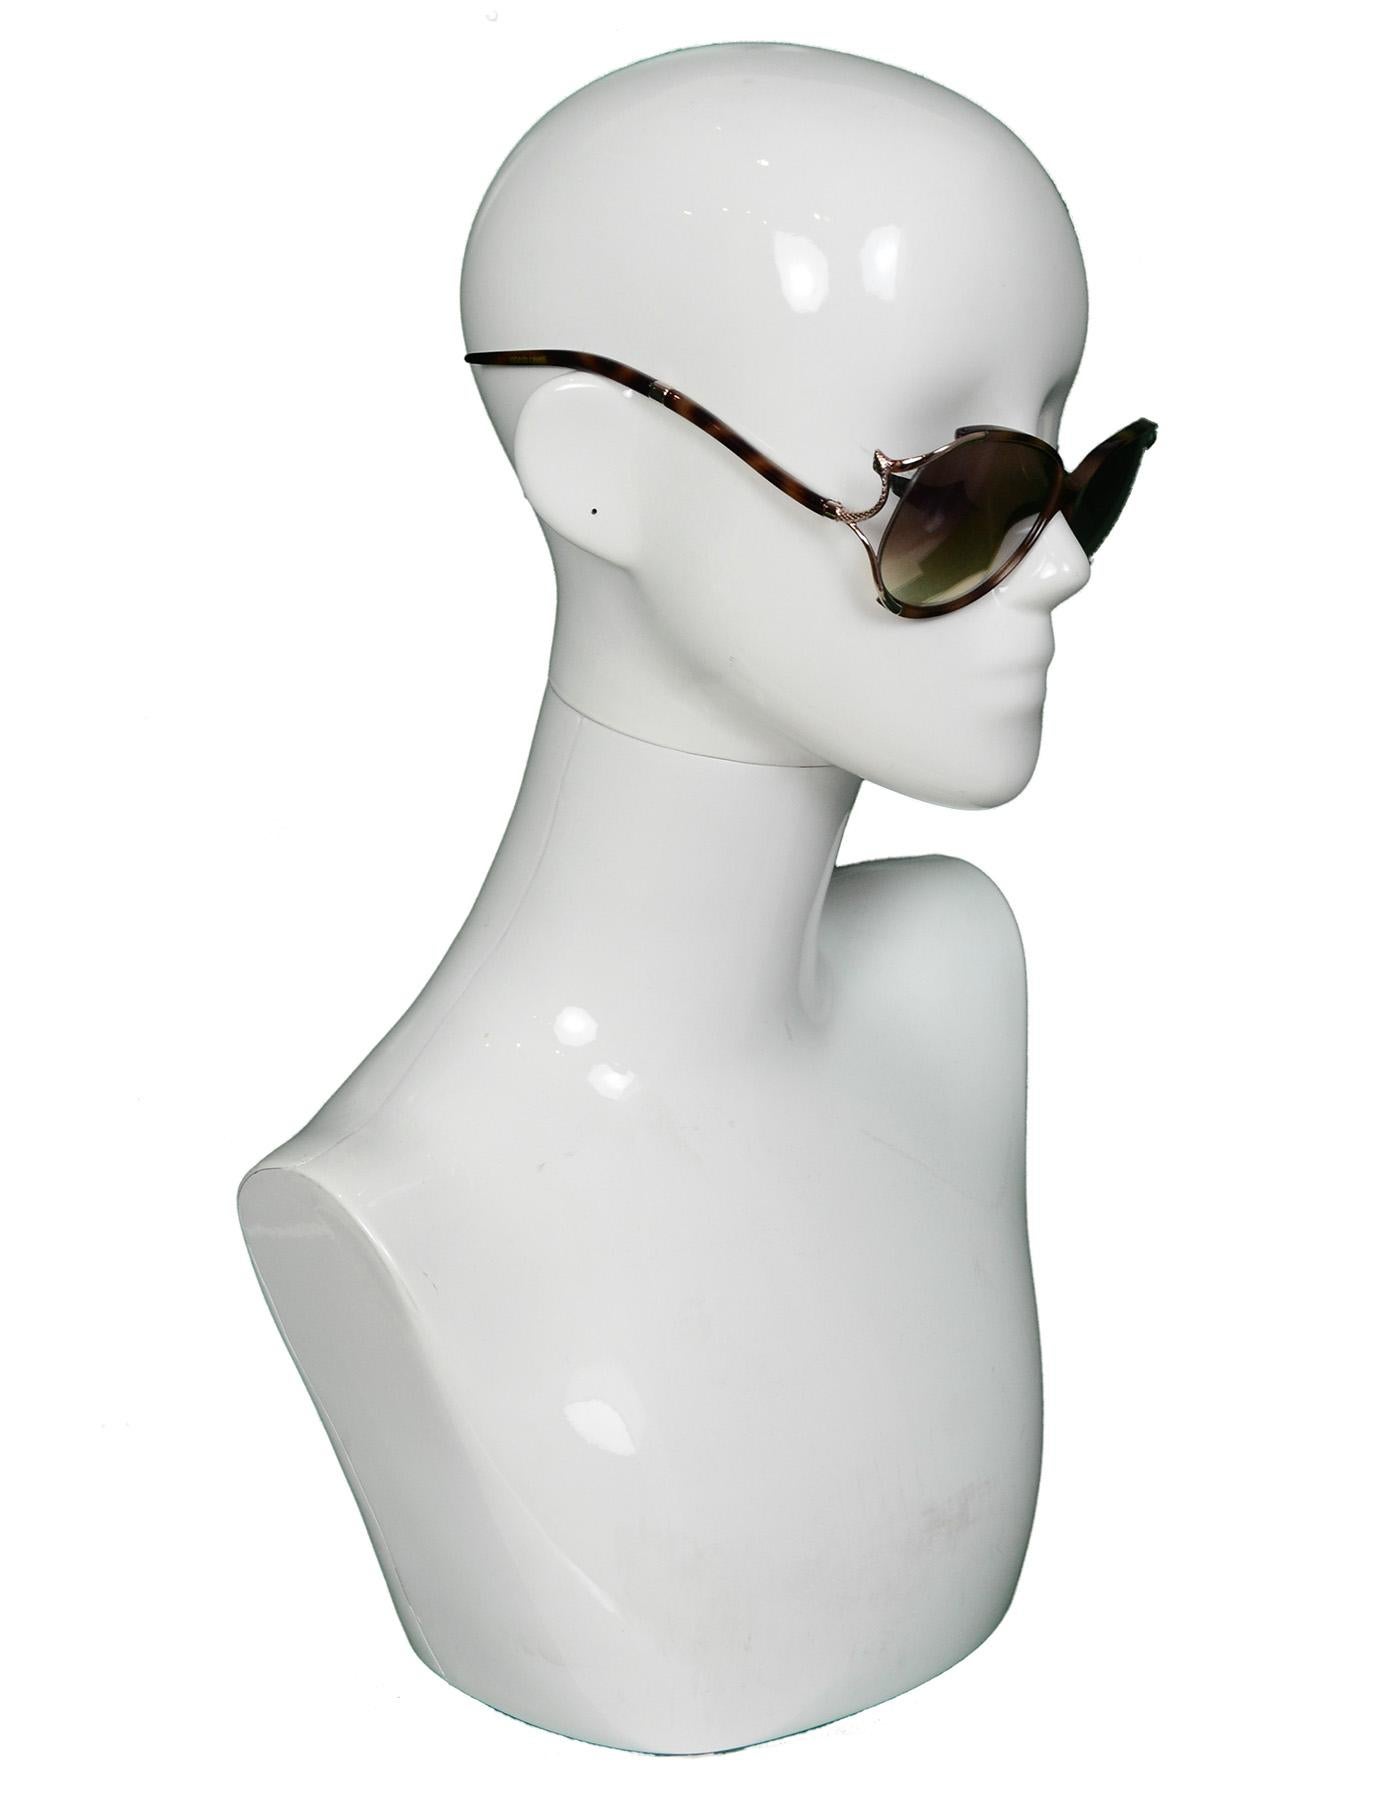 Roberto Cavalli Havana Brown Hamal Sunglasses WIth Goldtone Snake Sides

Made In: Italy
Color: Havana brown
Hardware: Goldtone
Materials: Acetate and metal
Overall Condition: Excellent pre-owned condition 
Estimated Retail: $360 + tax
Includes: 